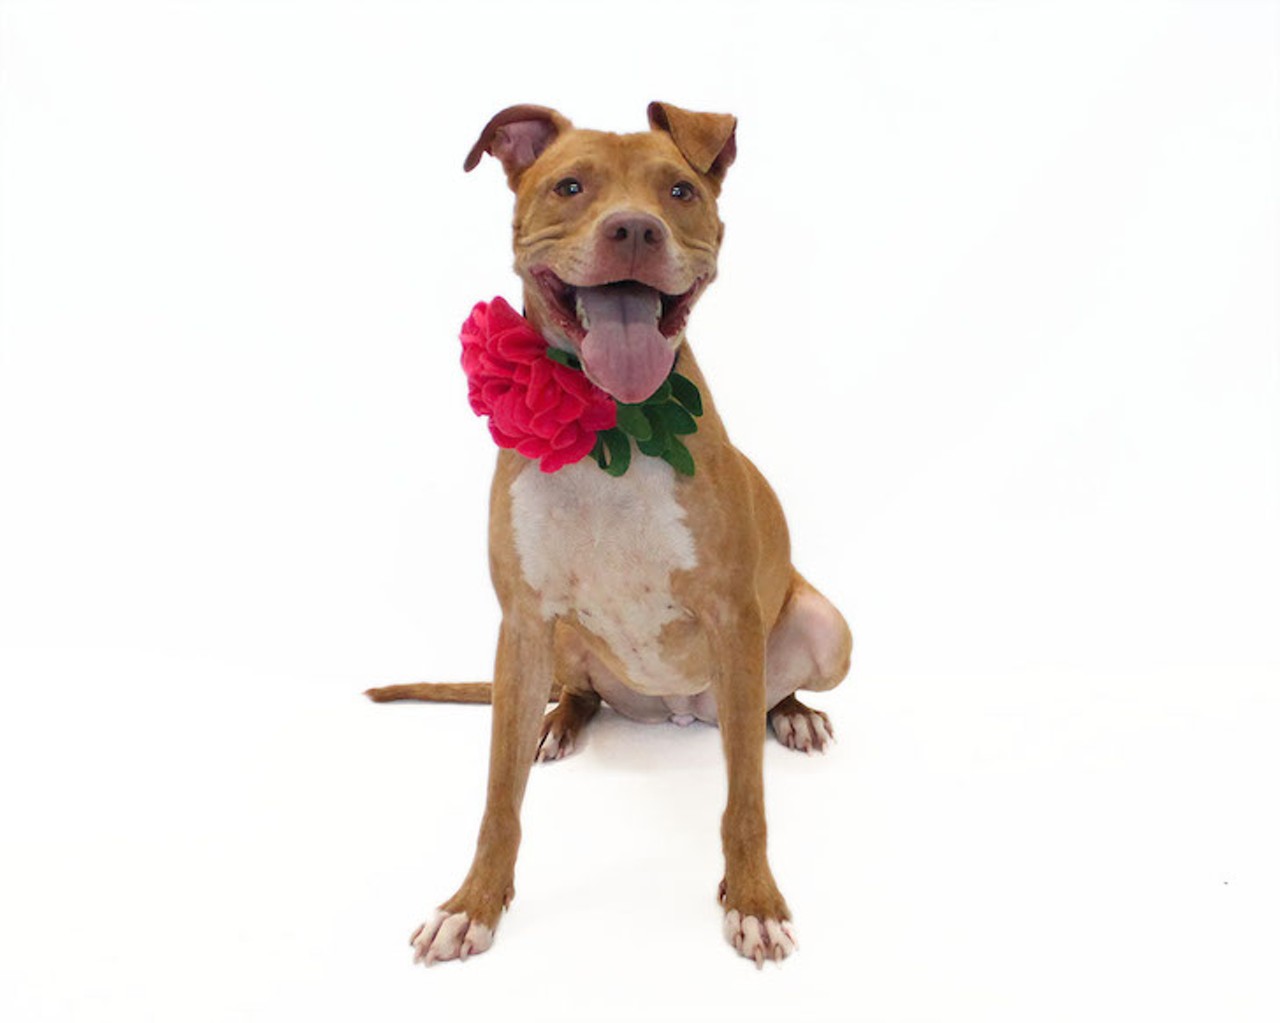 31 adoptable dogs available right now at OCAS